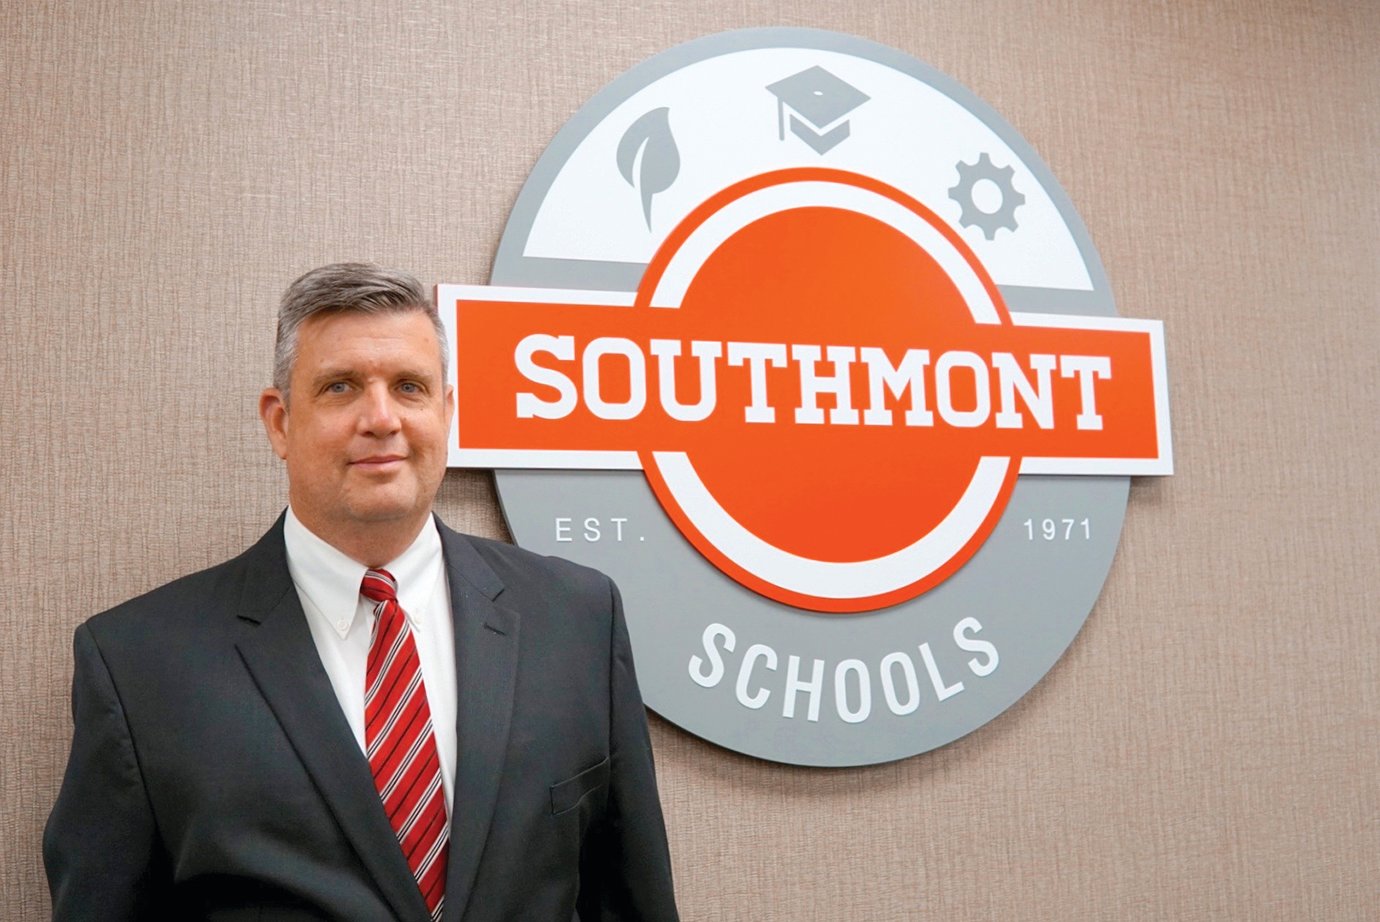 Dr. Chad Cripe is Southmont